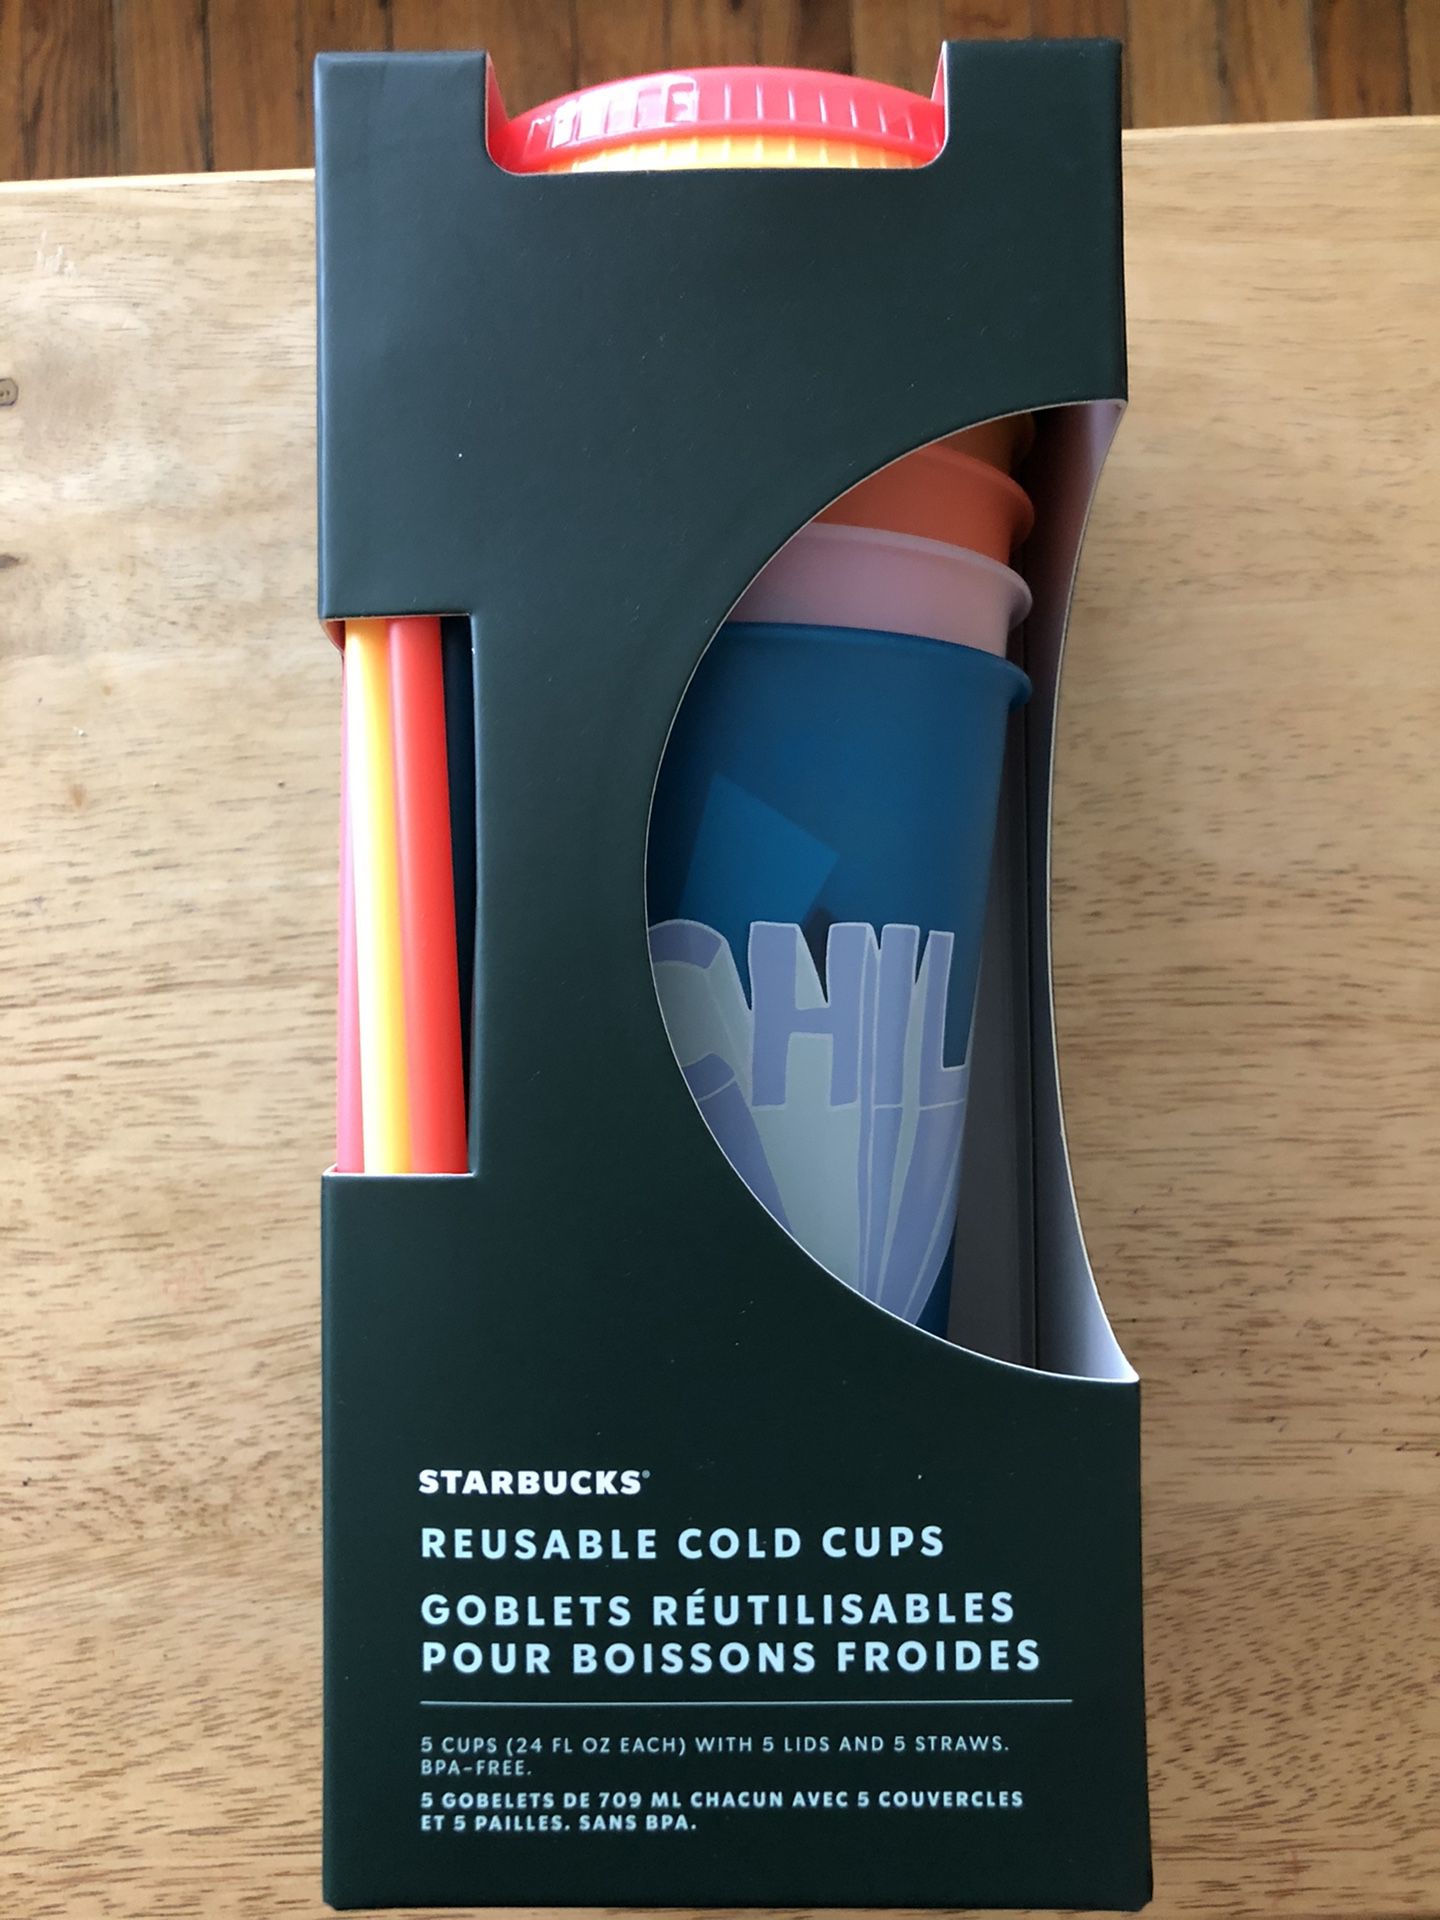 Starbucks Reusable Cold Cups (Chill Caffeinated Wake Up Rise.Shine) 5 Cups with 5 Lids and 5 Straws New